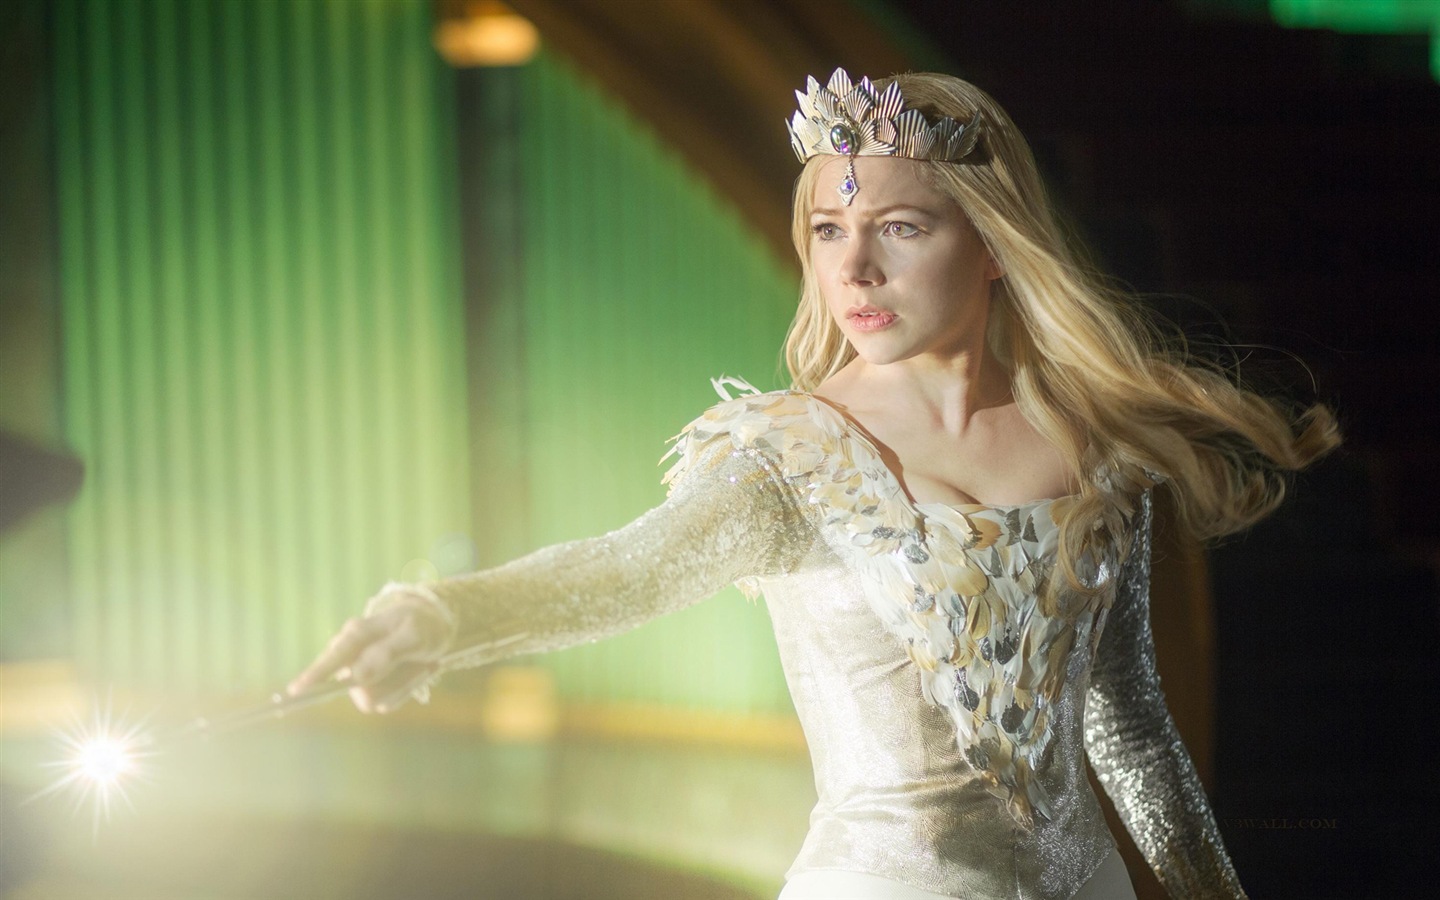 Oz The Great and Powerful 绿野仙踪 高清壁纸5 - 1440x900